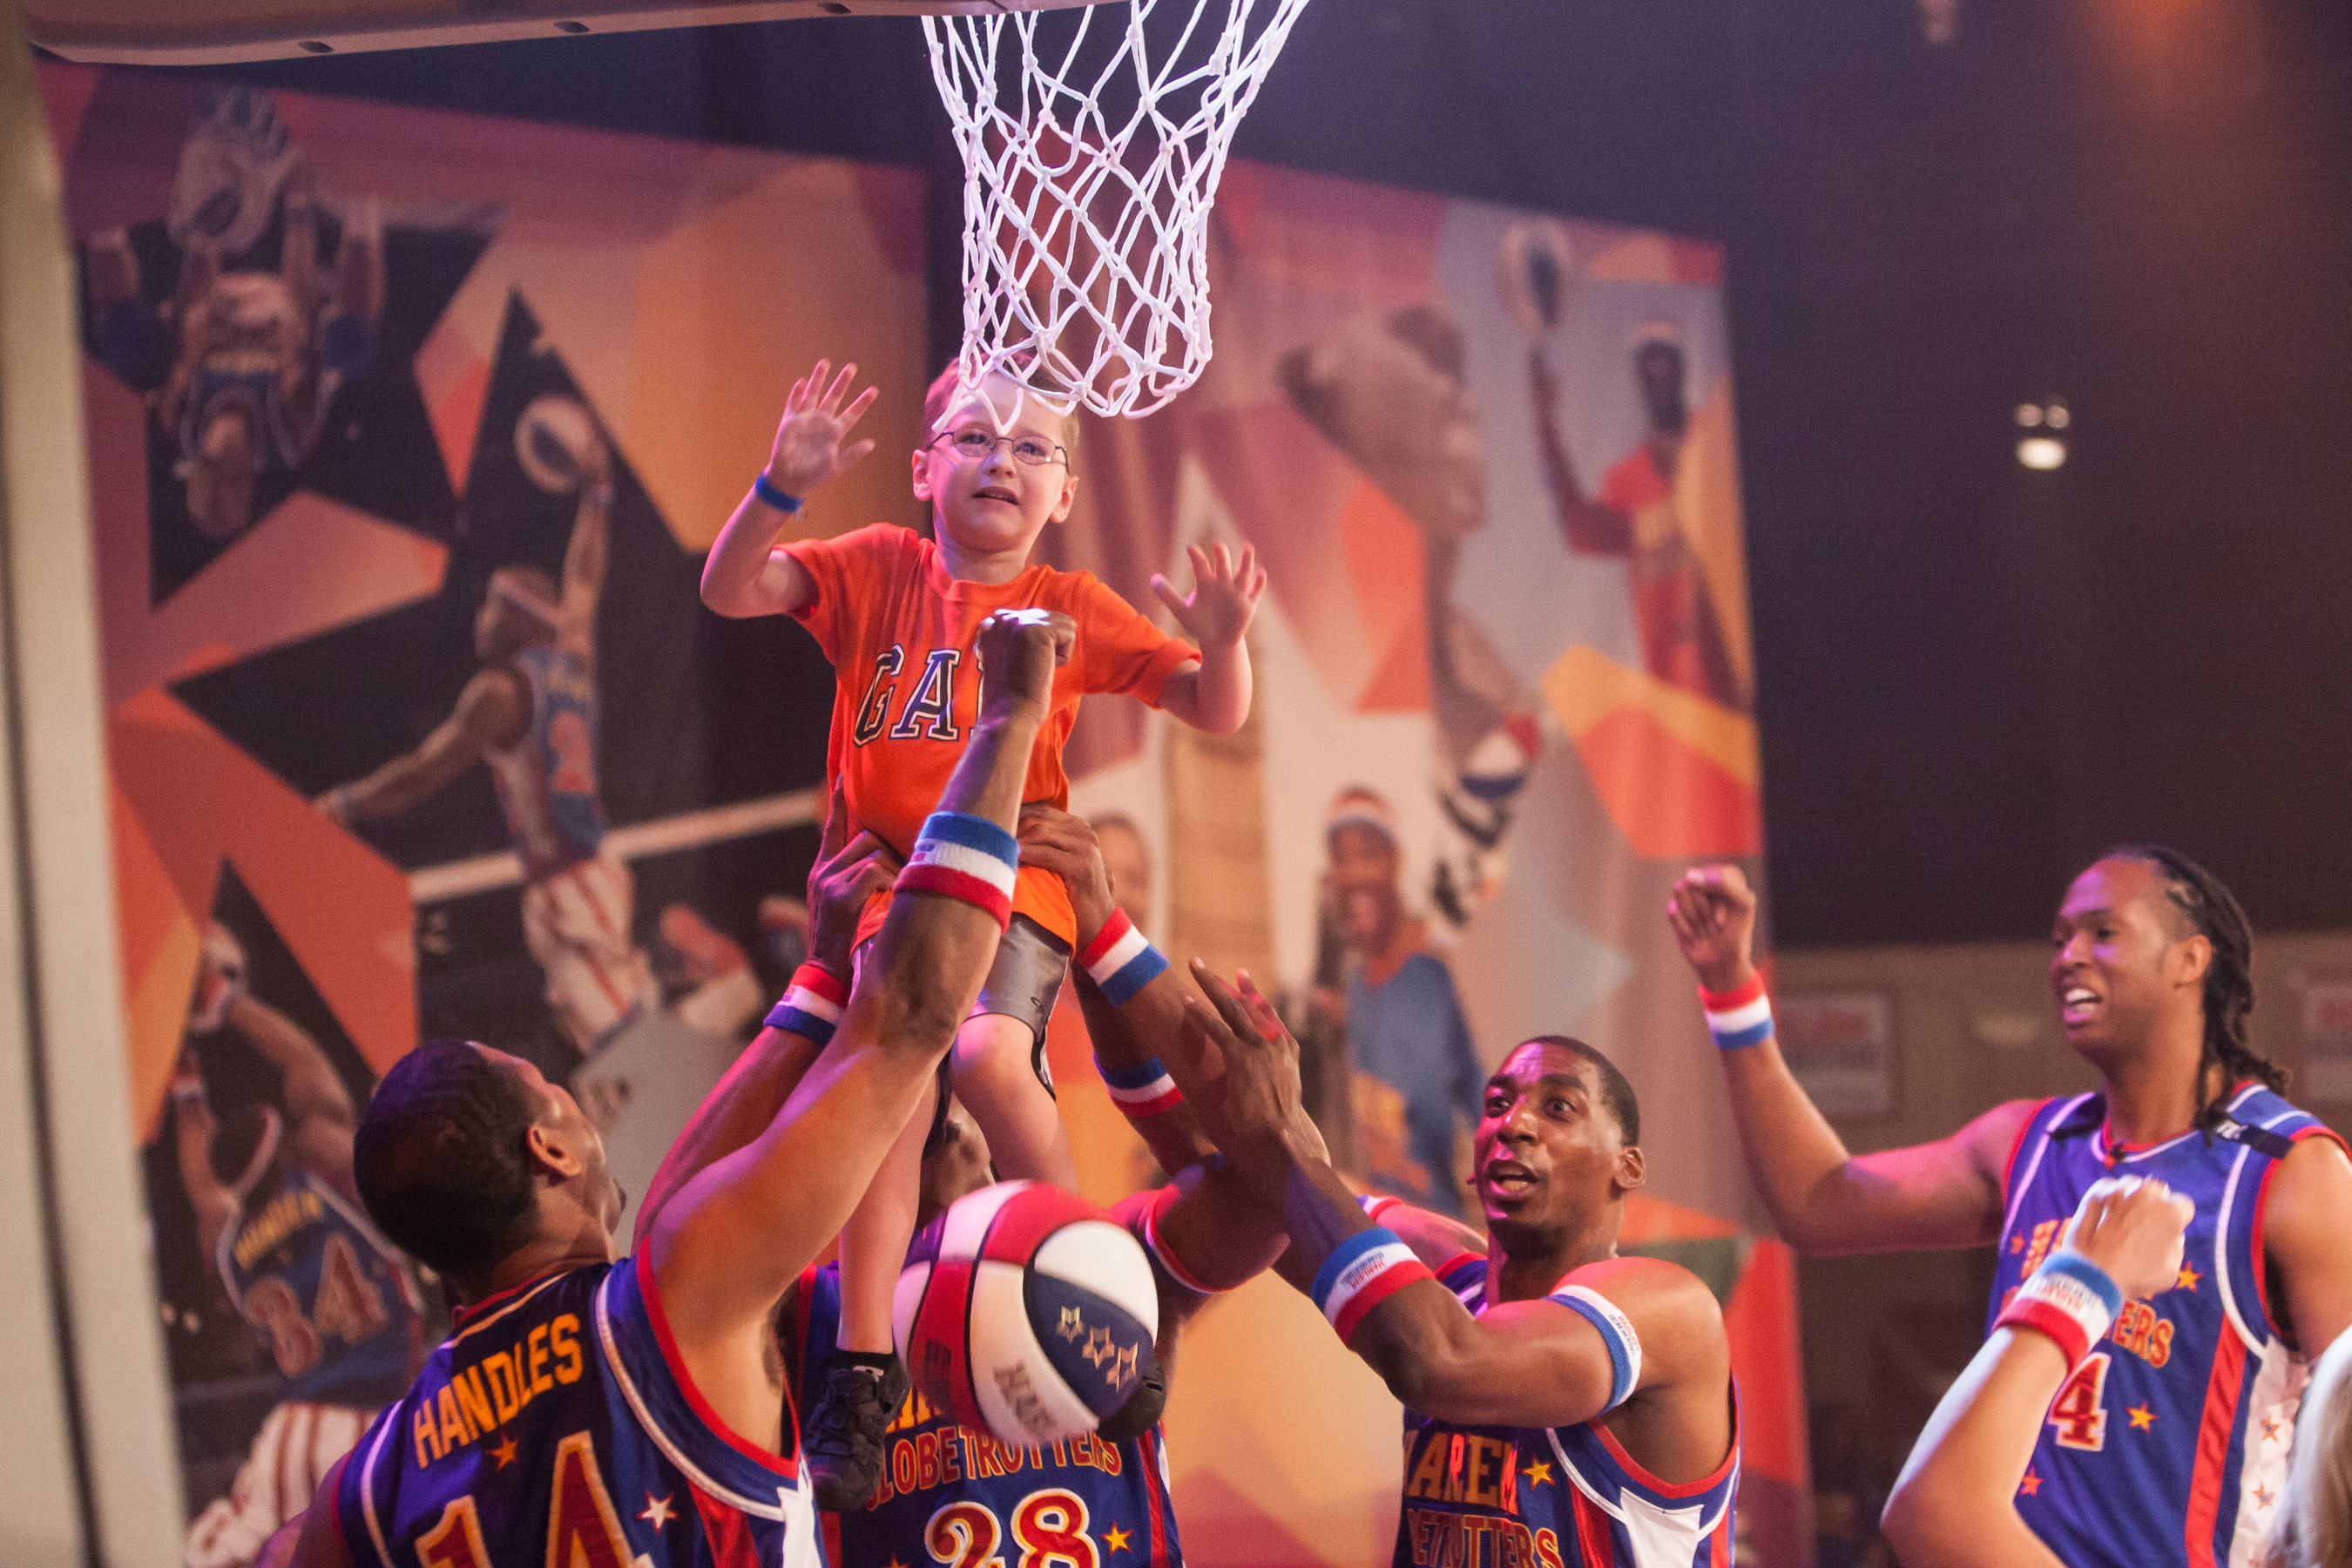 Young fans are part of the action in The Globetrotter Experience, the Harlem Globetrotters' first extended run featured at Silver Dollar City theme park in Branson, Missouri.